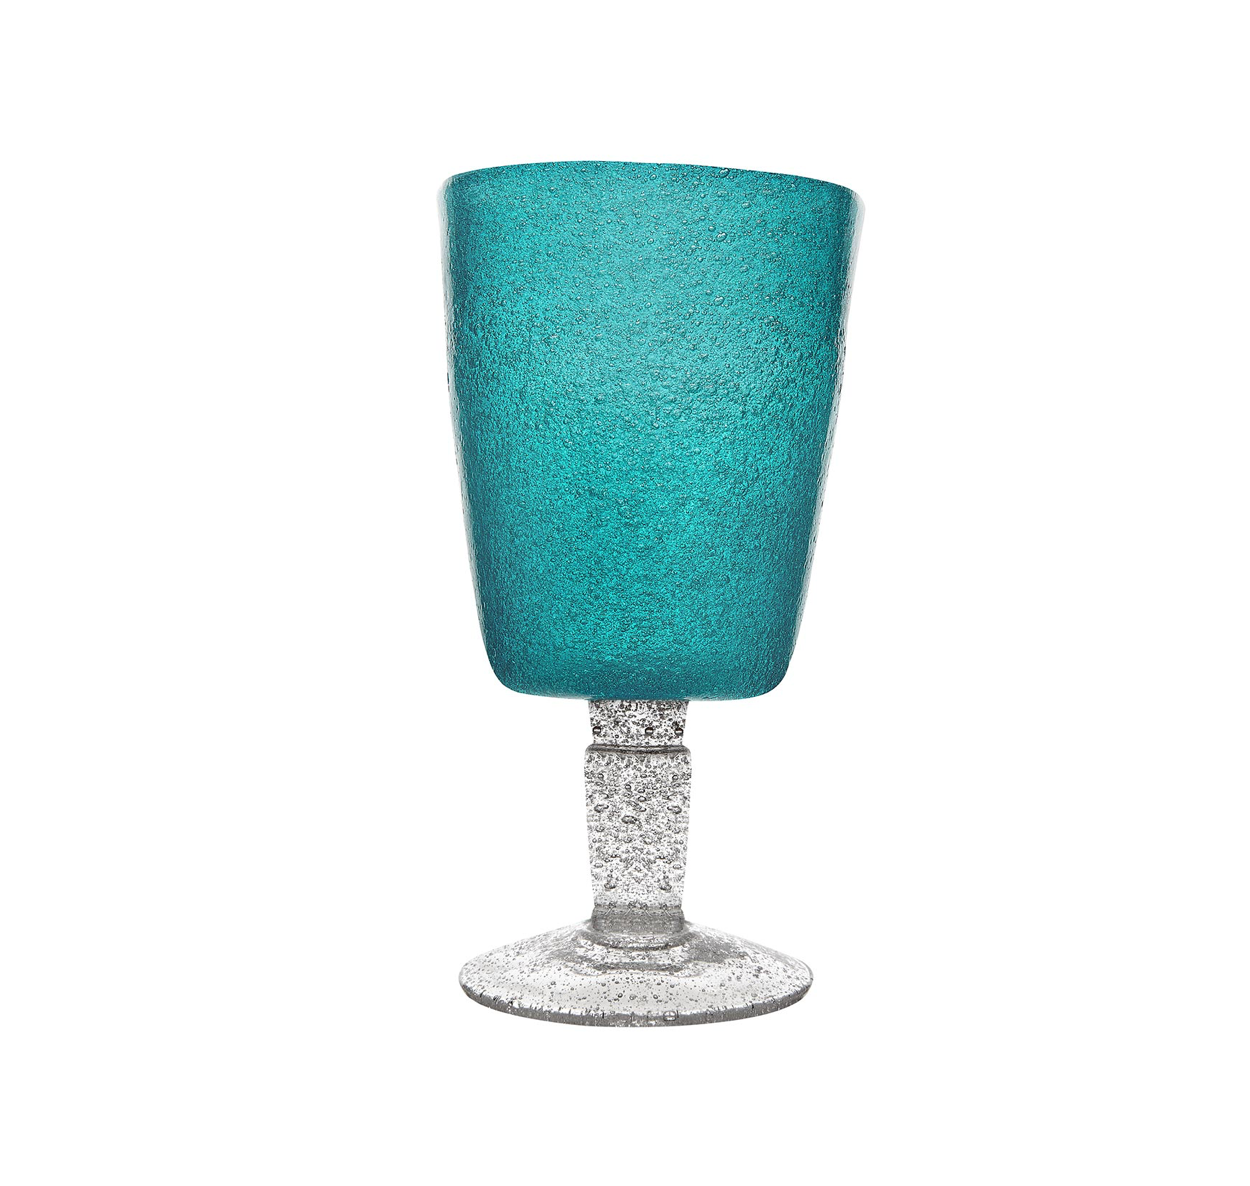 Goblet - Turquoise